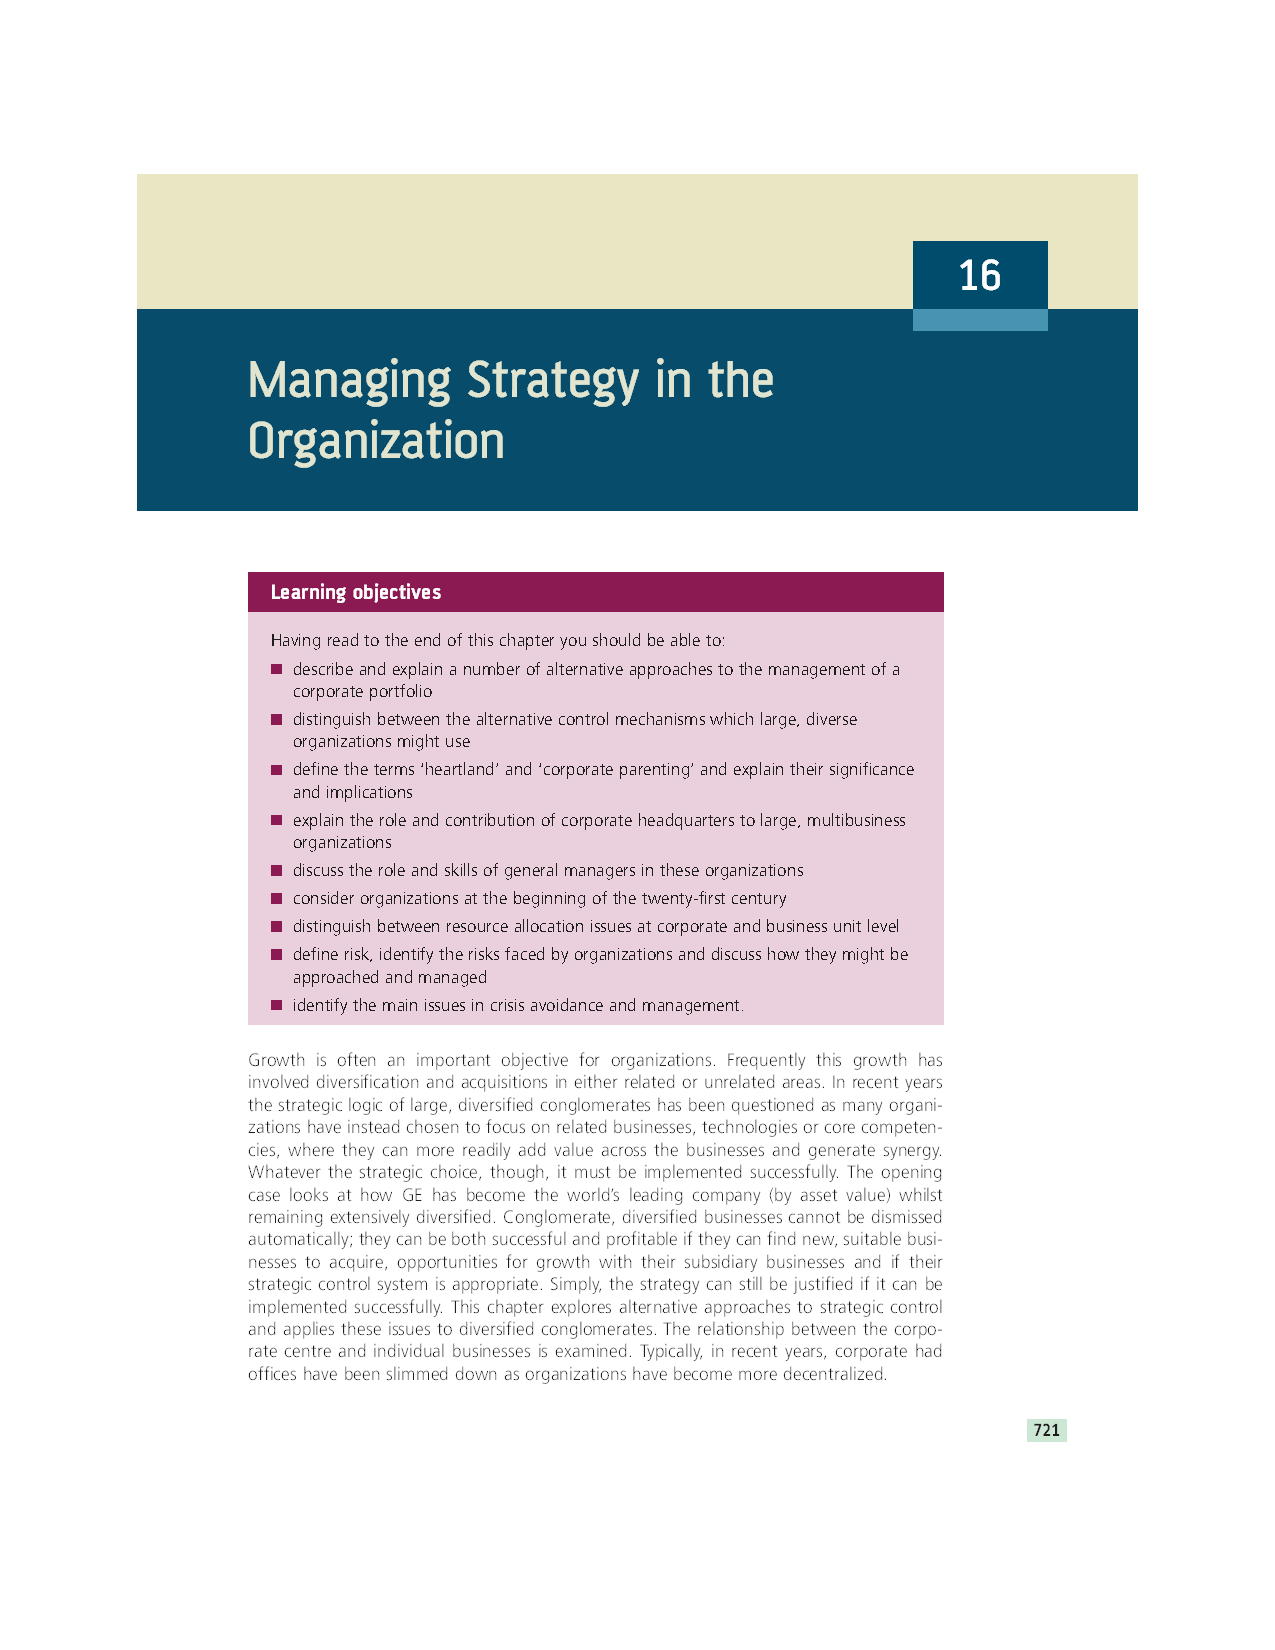 Managing Strategy in the organization